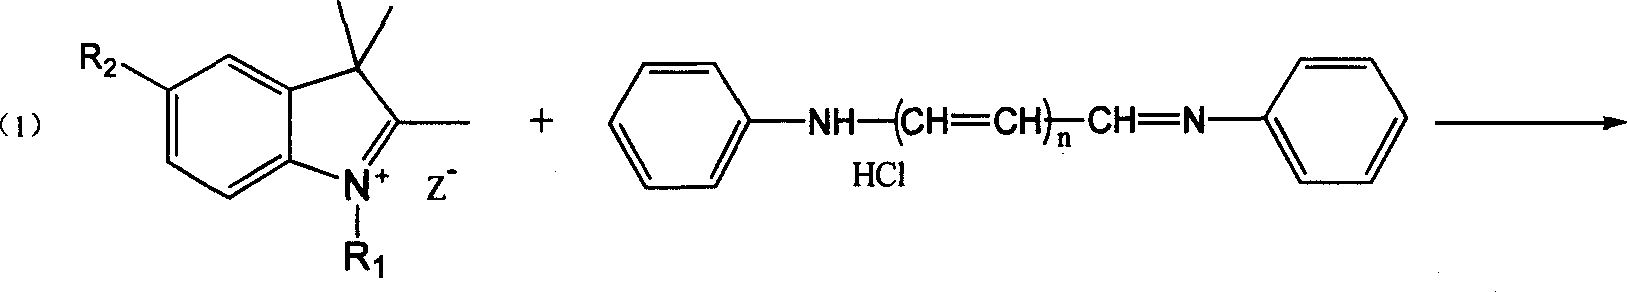 Process for synthesizing polymethin cyanine compound containing indole ring